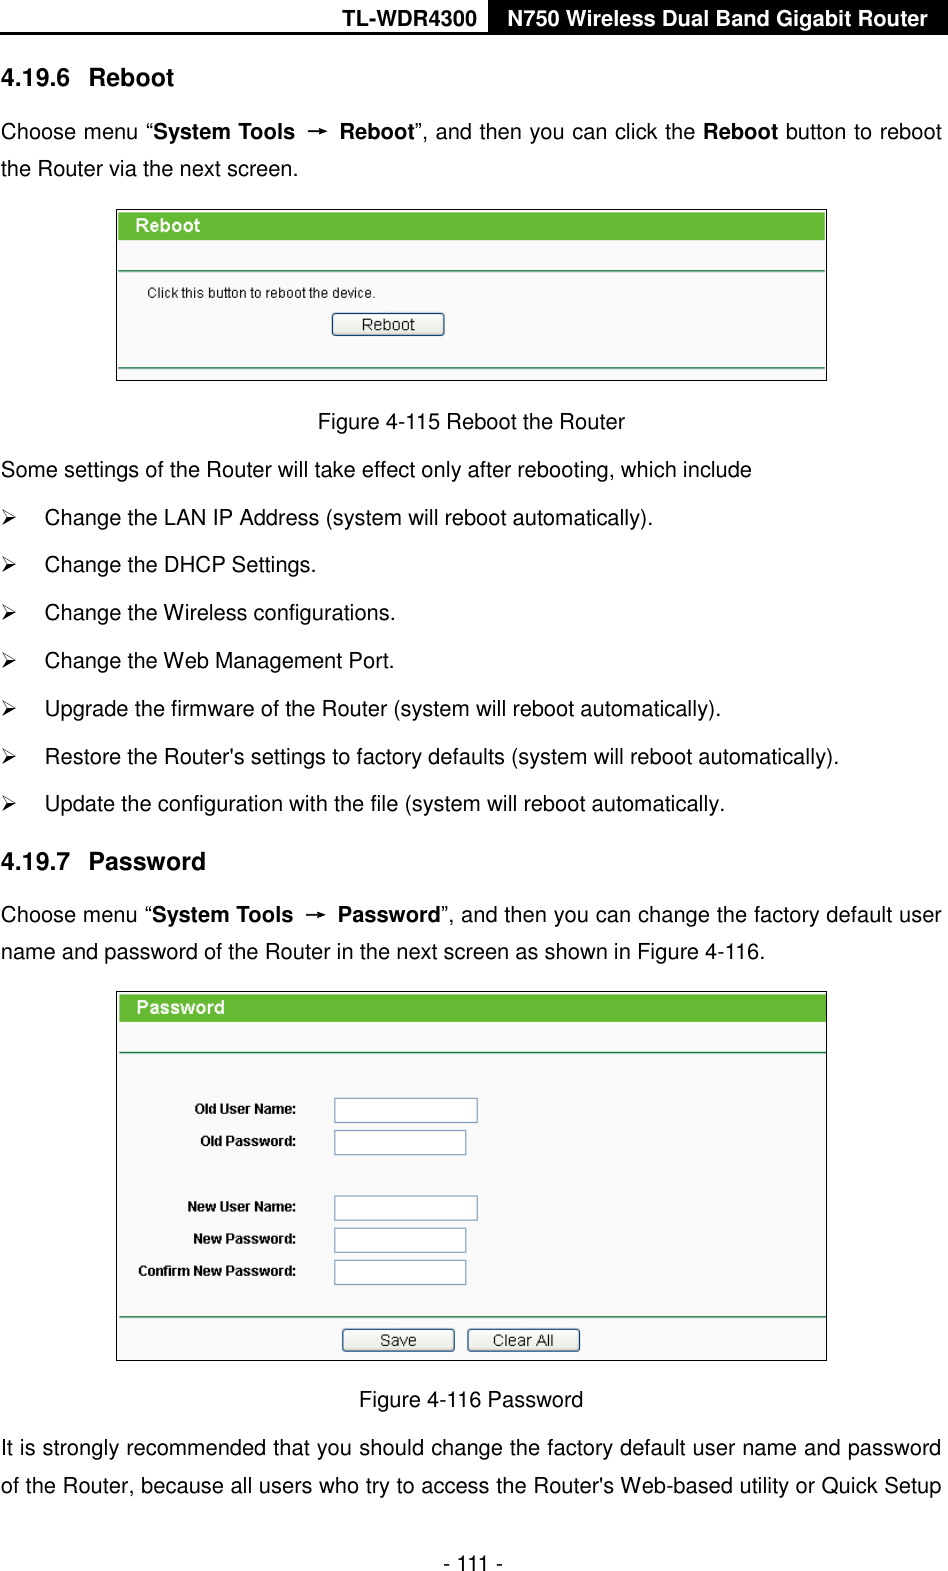 TL-WDR4300 N750 Wireless Dual Band Gigabit Router  - 111 - 4.19.6  Reboot Choose menu “System Tools  →  Reboot”, and then you can click the Reboot button to reboot the Router via the next screen.  Figure 4-115 Reboot the Router Some settings of the Router will take effect only after rebooting, which include   Change the LAN IP Address (system will reboot automatically).   Change the DHCP Settings.   Change the Wireless configurations.   Change the Web Management Port.   Upgrade the firmware of the Router (system will reboot automatically).   Restore the Router&apos;s settings to factory defaults (system will reboot automatically).   Update the configuration with the file (system will reboot automatically. 4.19.7  Password Choose menu “System Tools  →  Password”, and then you can change the factory default user name and password of the Router in the next screen as shown in Figure 4-116.  Figure 4-116 Password It is strongly recommended that you should change the factory default user name and password of the Router, because all users who try to access the Router&apos;s Web-based utility or Quick Setup 